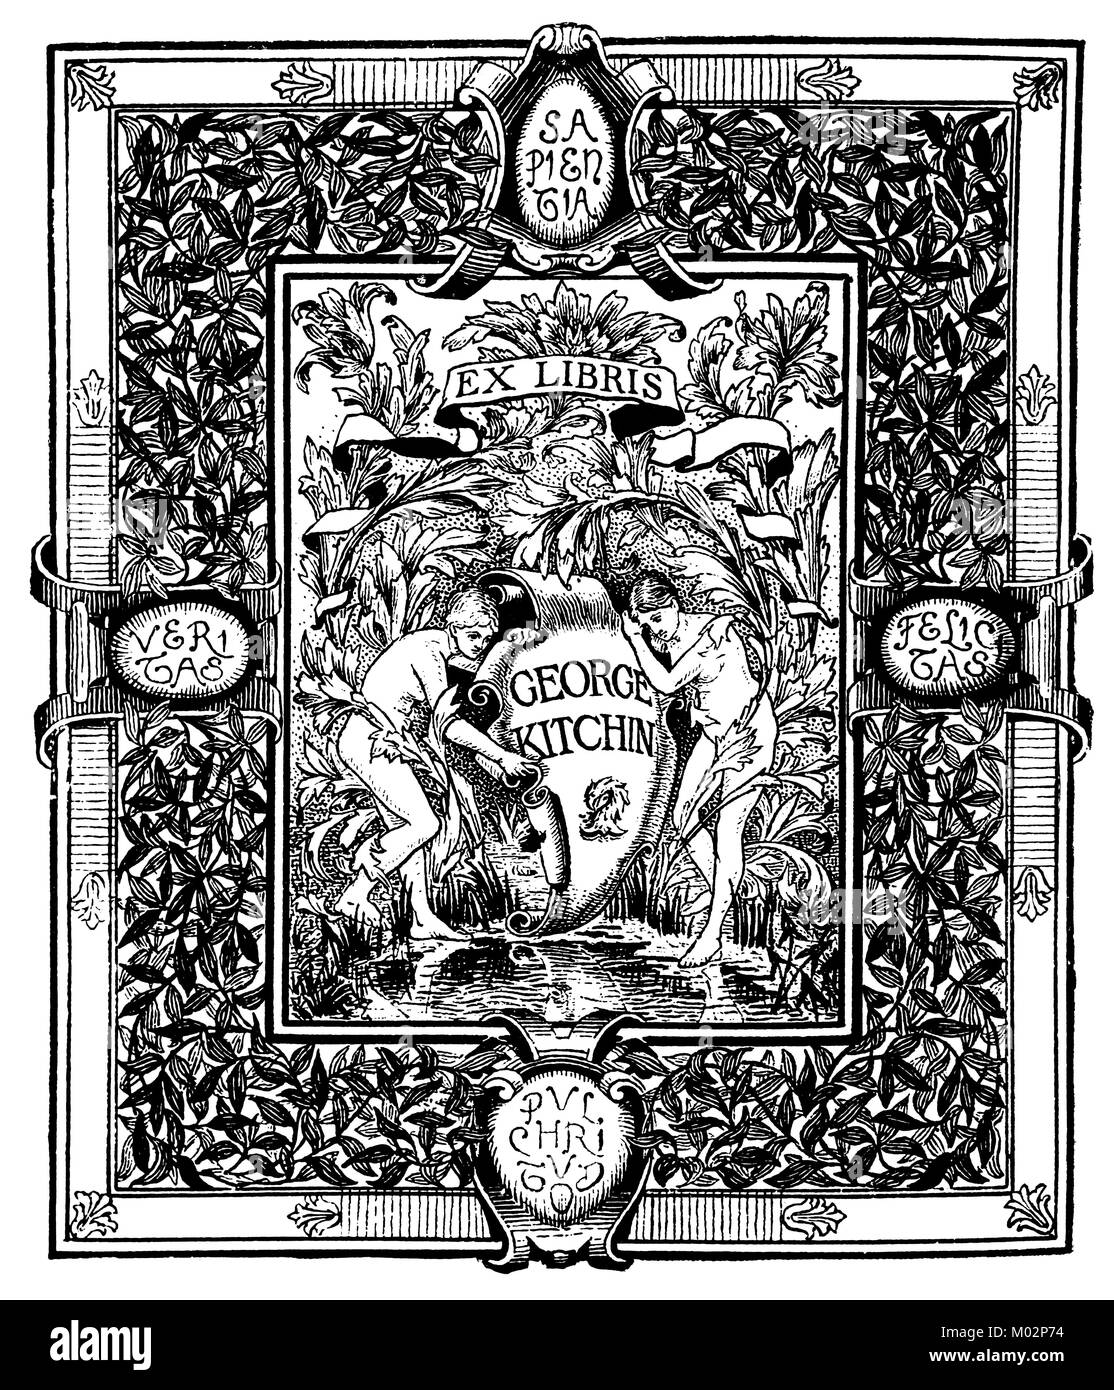 Bookplate for Geirge Kitchin,1893 book plate design by artist Frederick Colin Tilney from The Studio Magazine Stock Photo